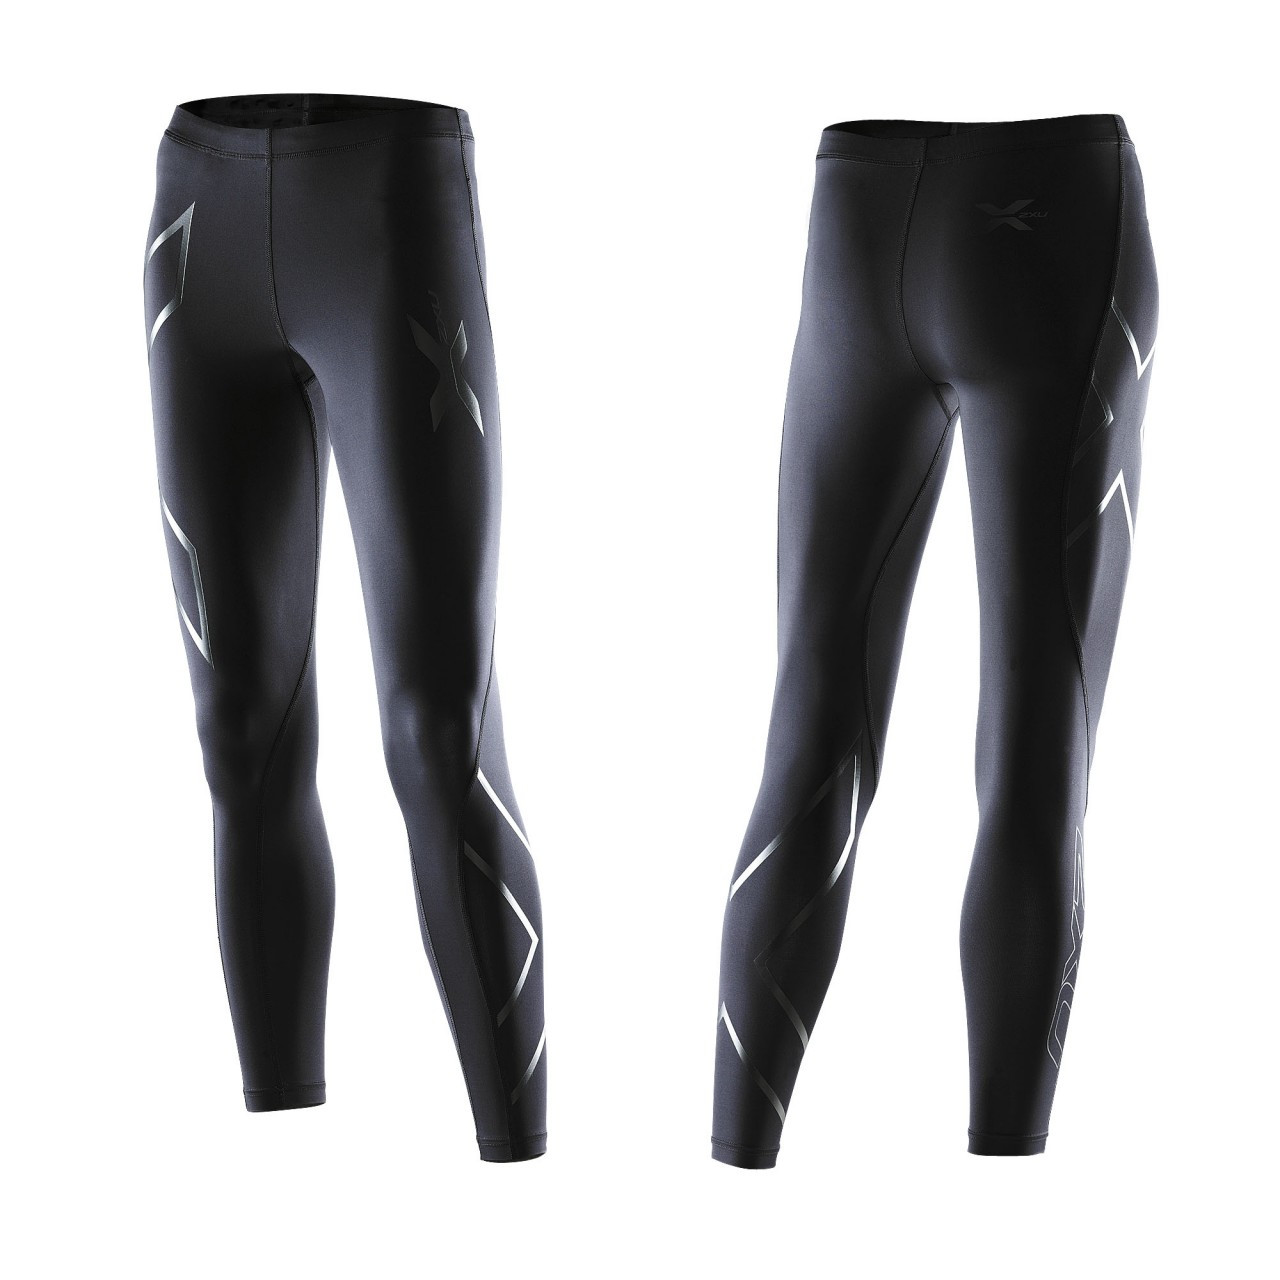  2XU Women's Refresh Recovery Compression Tights